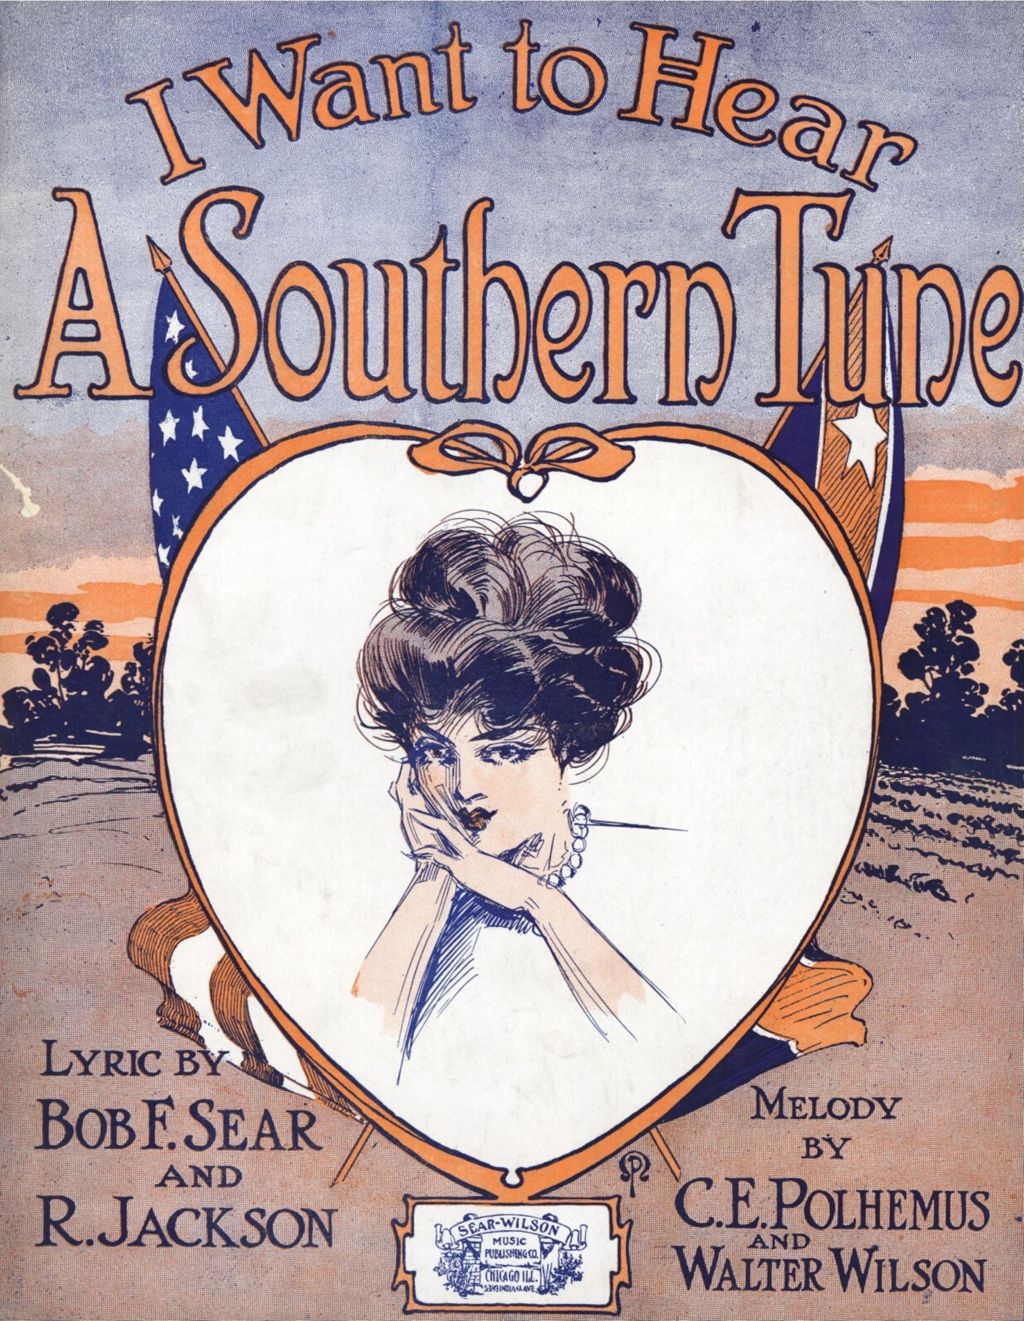 Miniature of I Want to Hear a Southern Tune